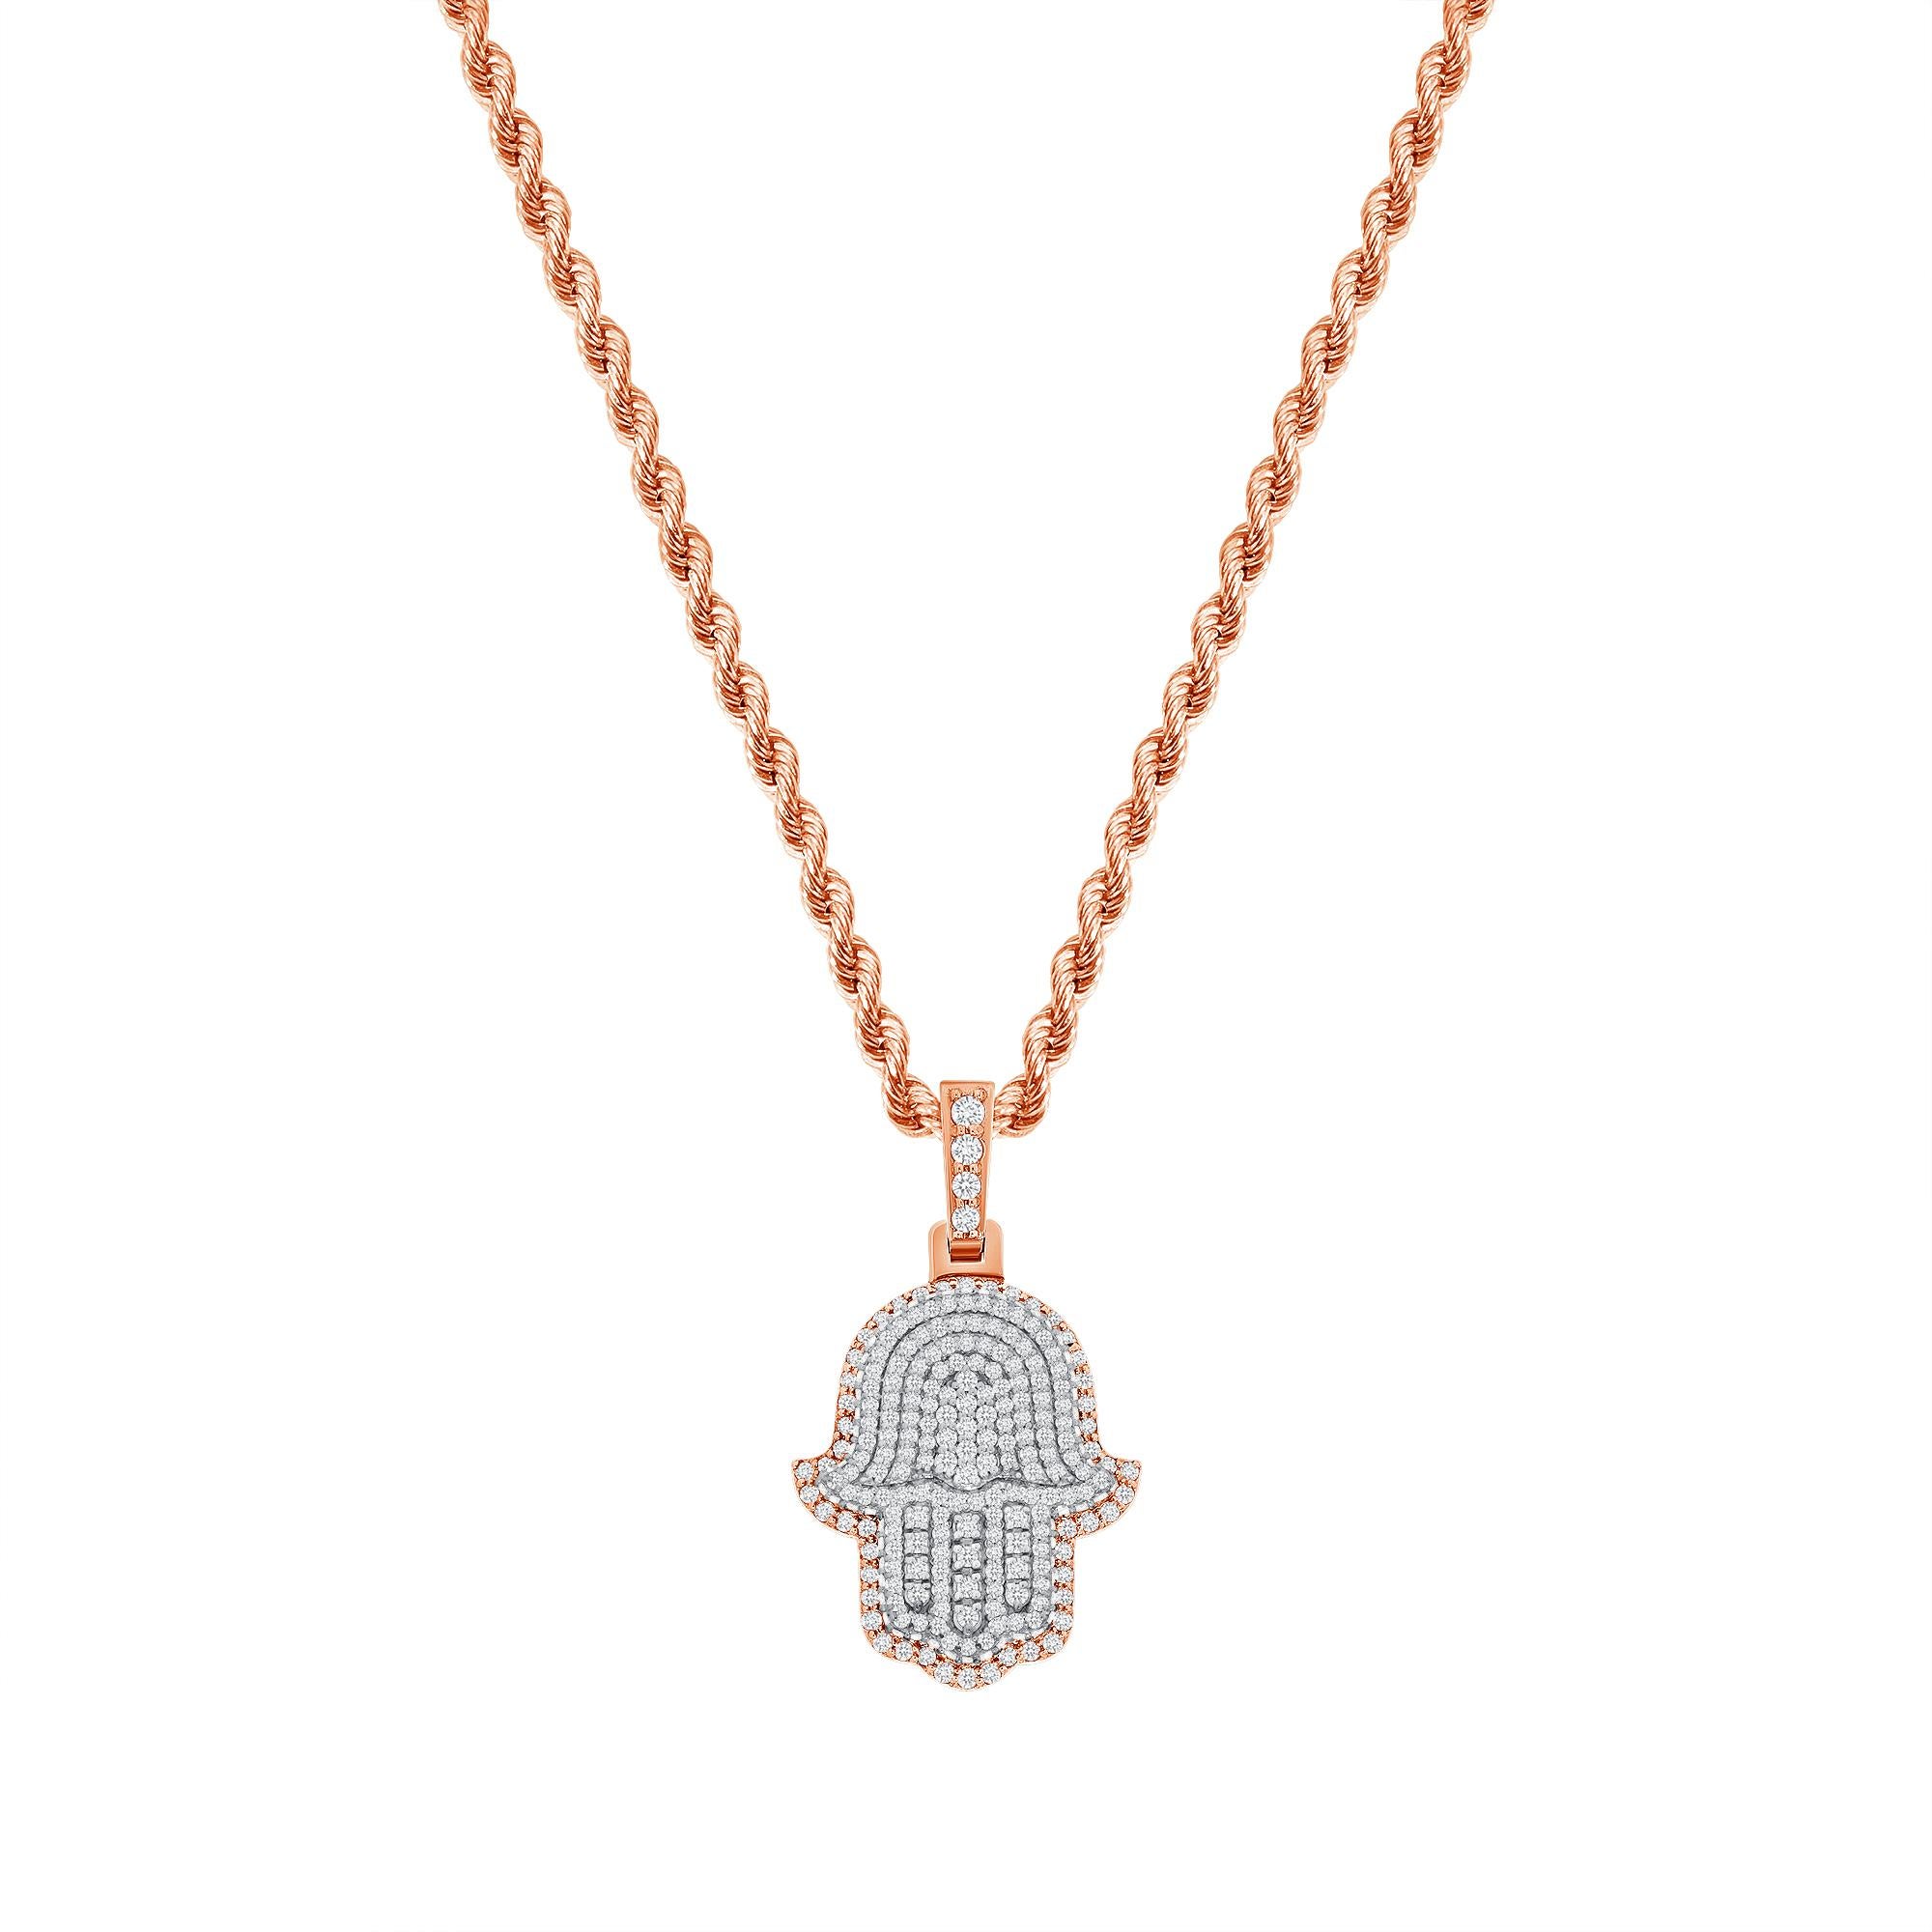 This Hamsa diamond necklace provides both a spiritual and fashionable on trend look. 

Metal: 14k Gold
Diamond Cut: Round
Total Diamond Carats: 2 Carats
Diamond Clarity: VS
Diamond Color: F-G
Necklace Length: 22 Inches
Color: Rose Gold
